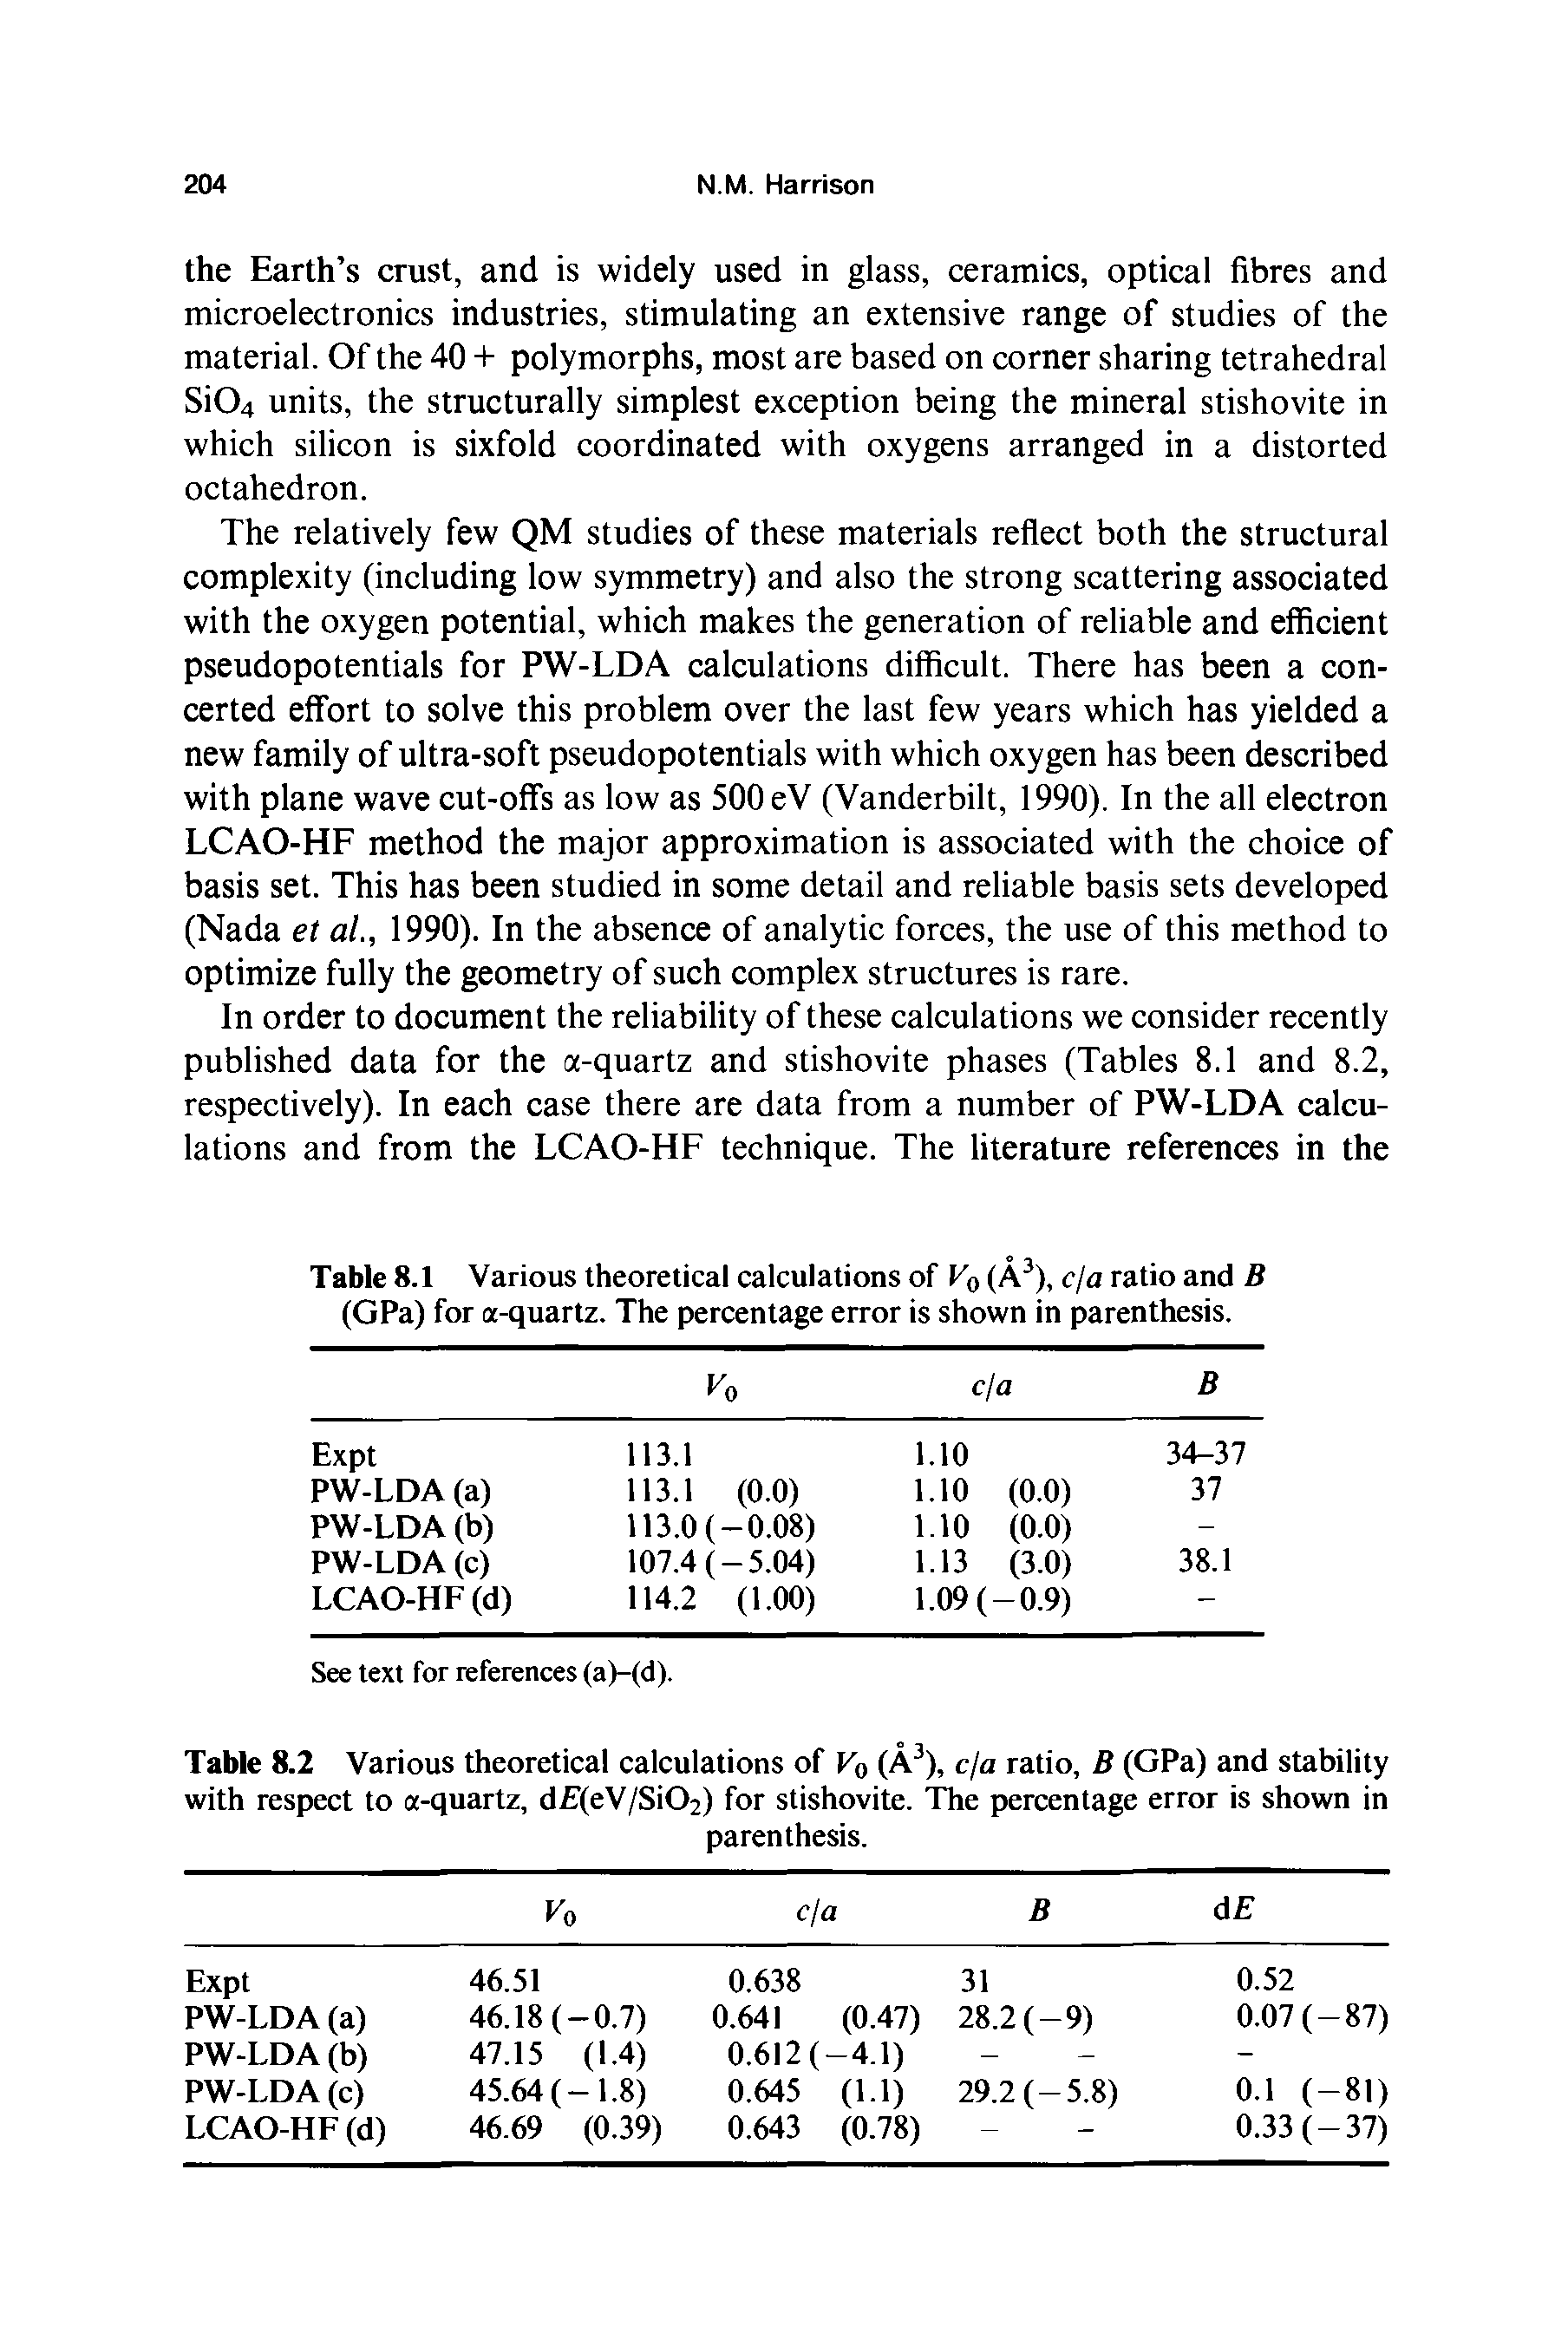 Table 8.1 Various theoretical calculations of V0 (A3), c/a ratio and B (GPa) for a-quartz. The percentage error is shown in parenthesis.